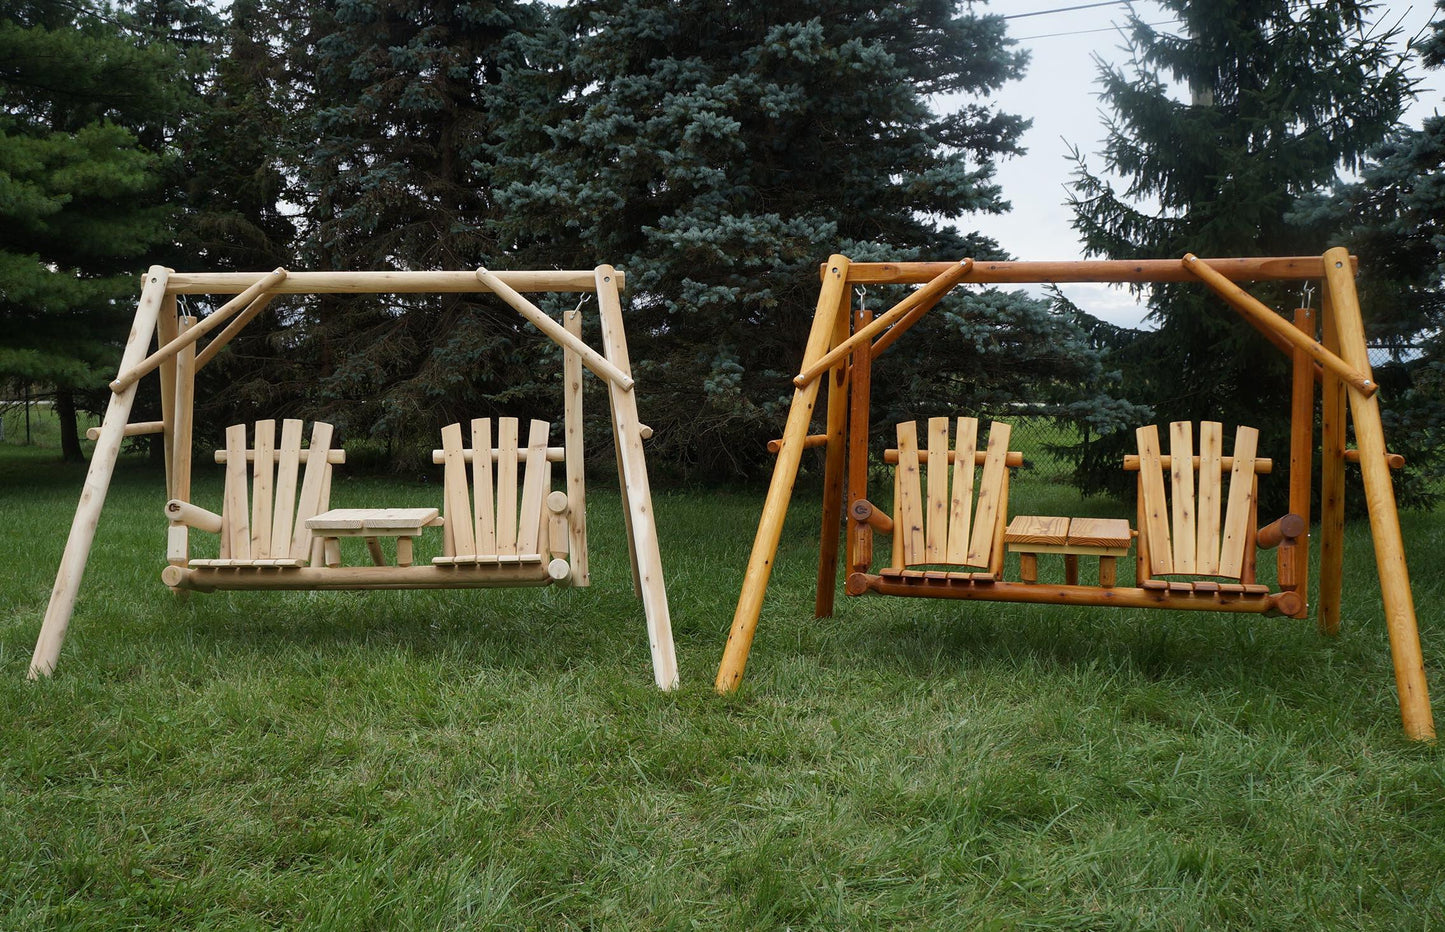 Moon Valley Rustic Tete-a-tete Lawn Swing  - LEAD TIME TO SHIP 2 WEEKS OR LESS